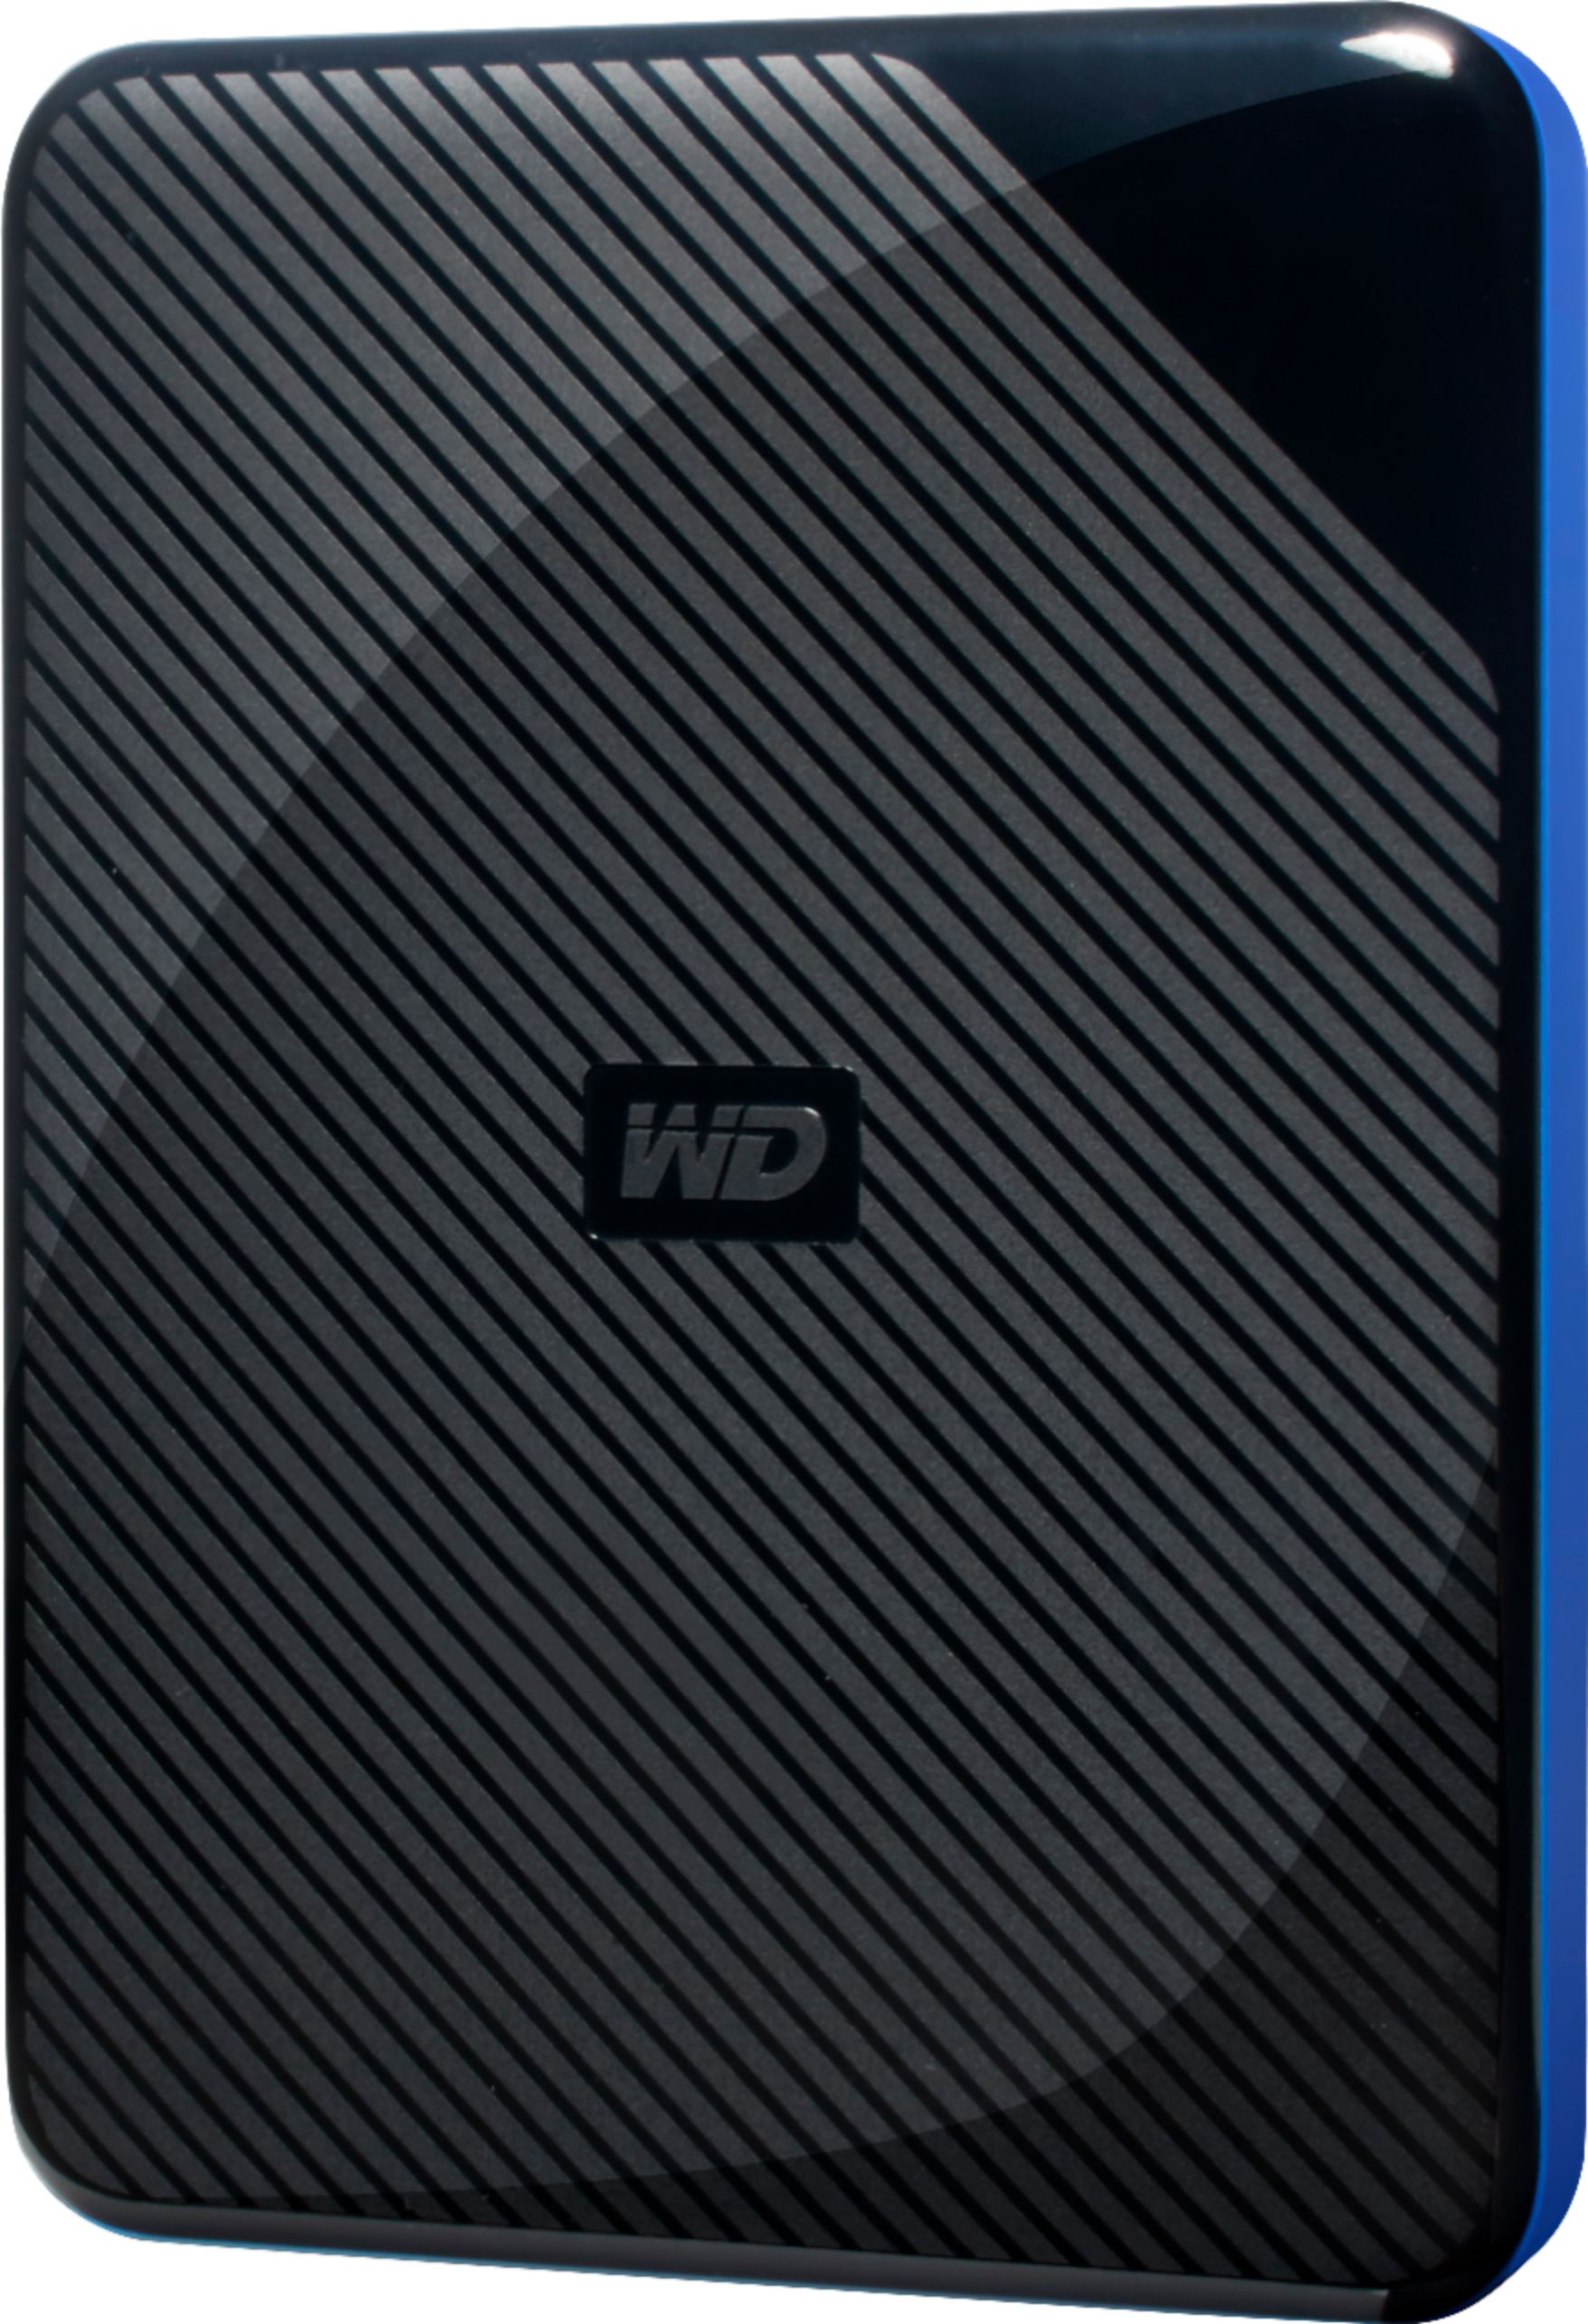 wd 2tb gaming drive works with playstation 4